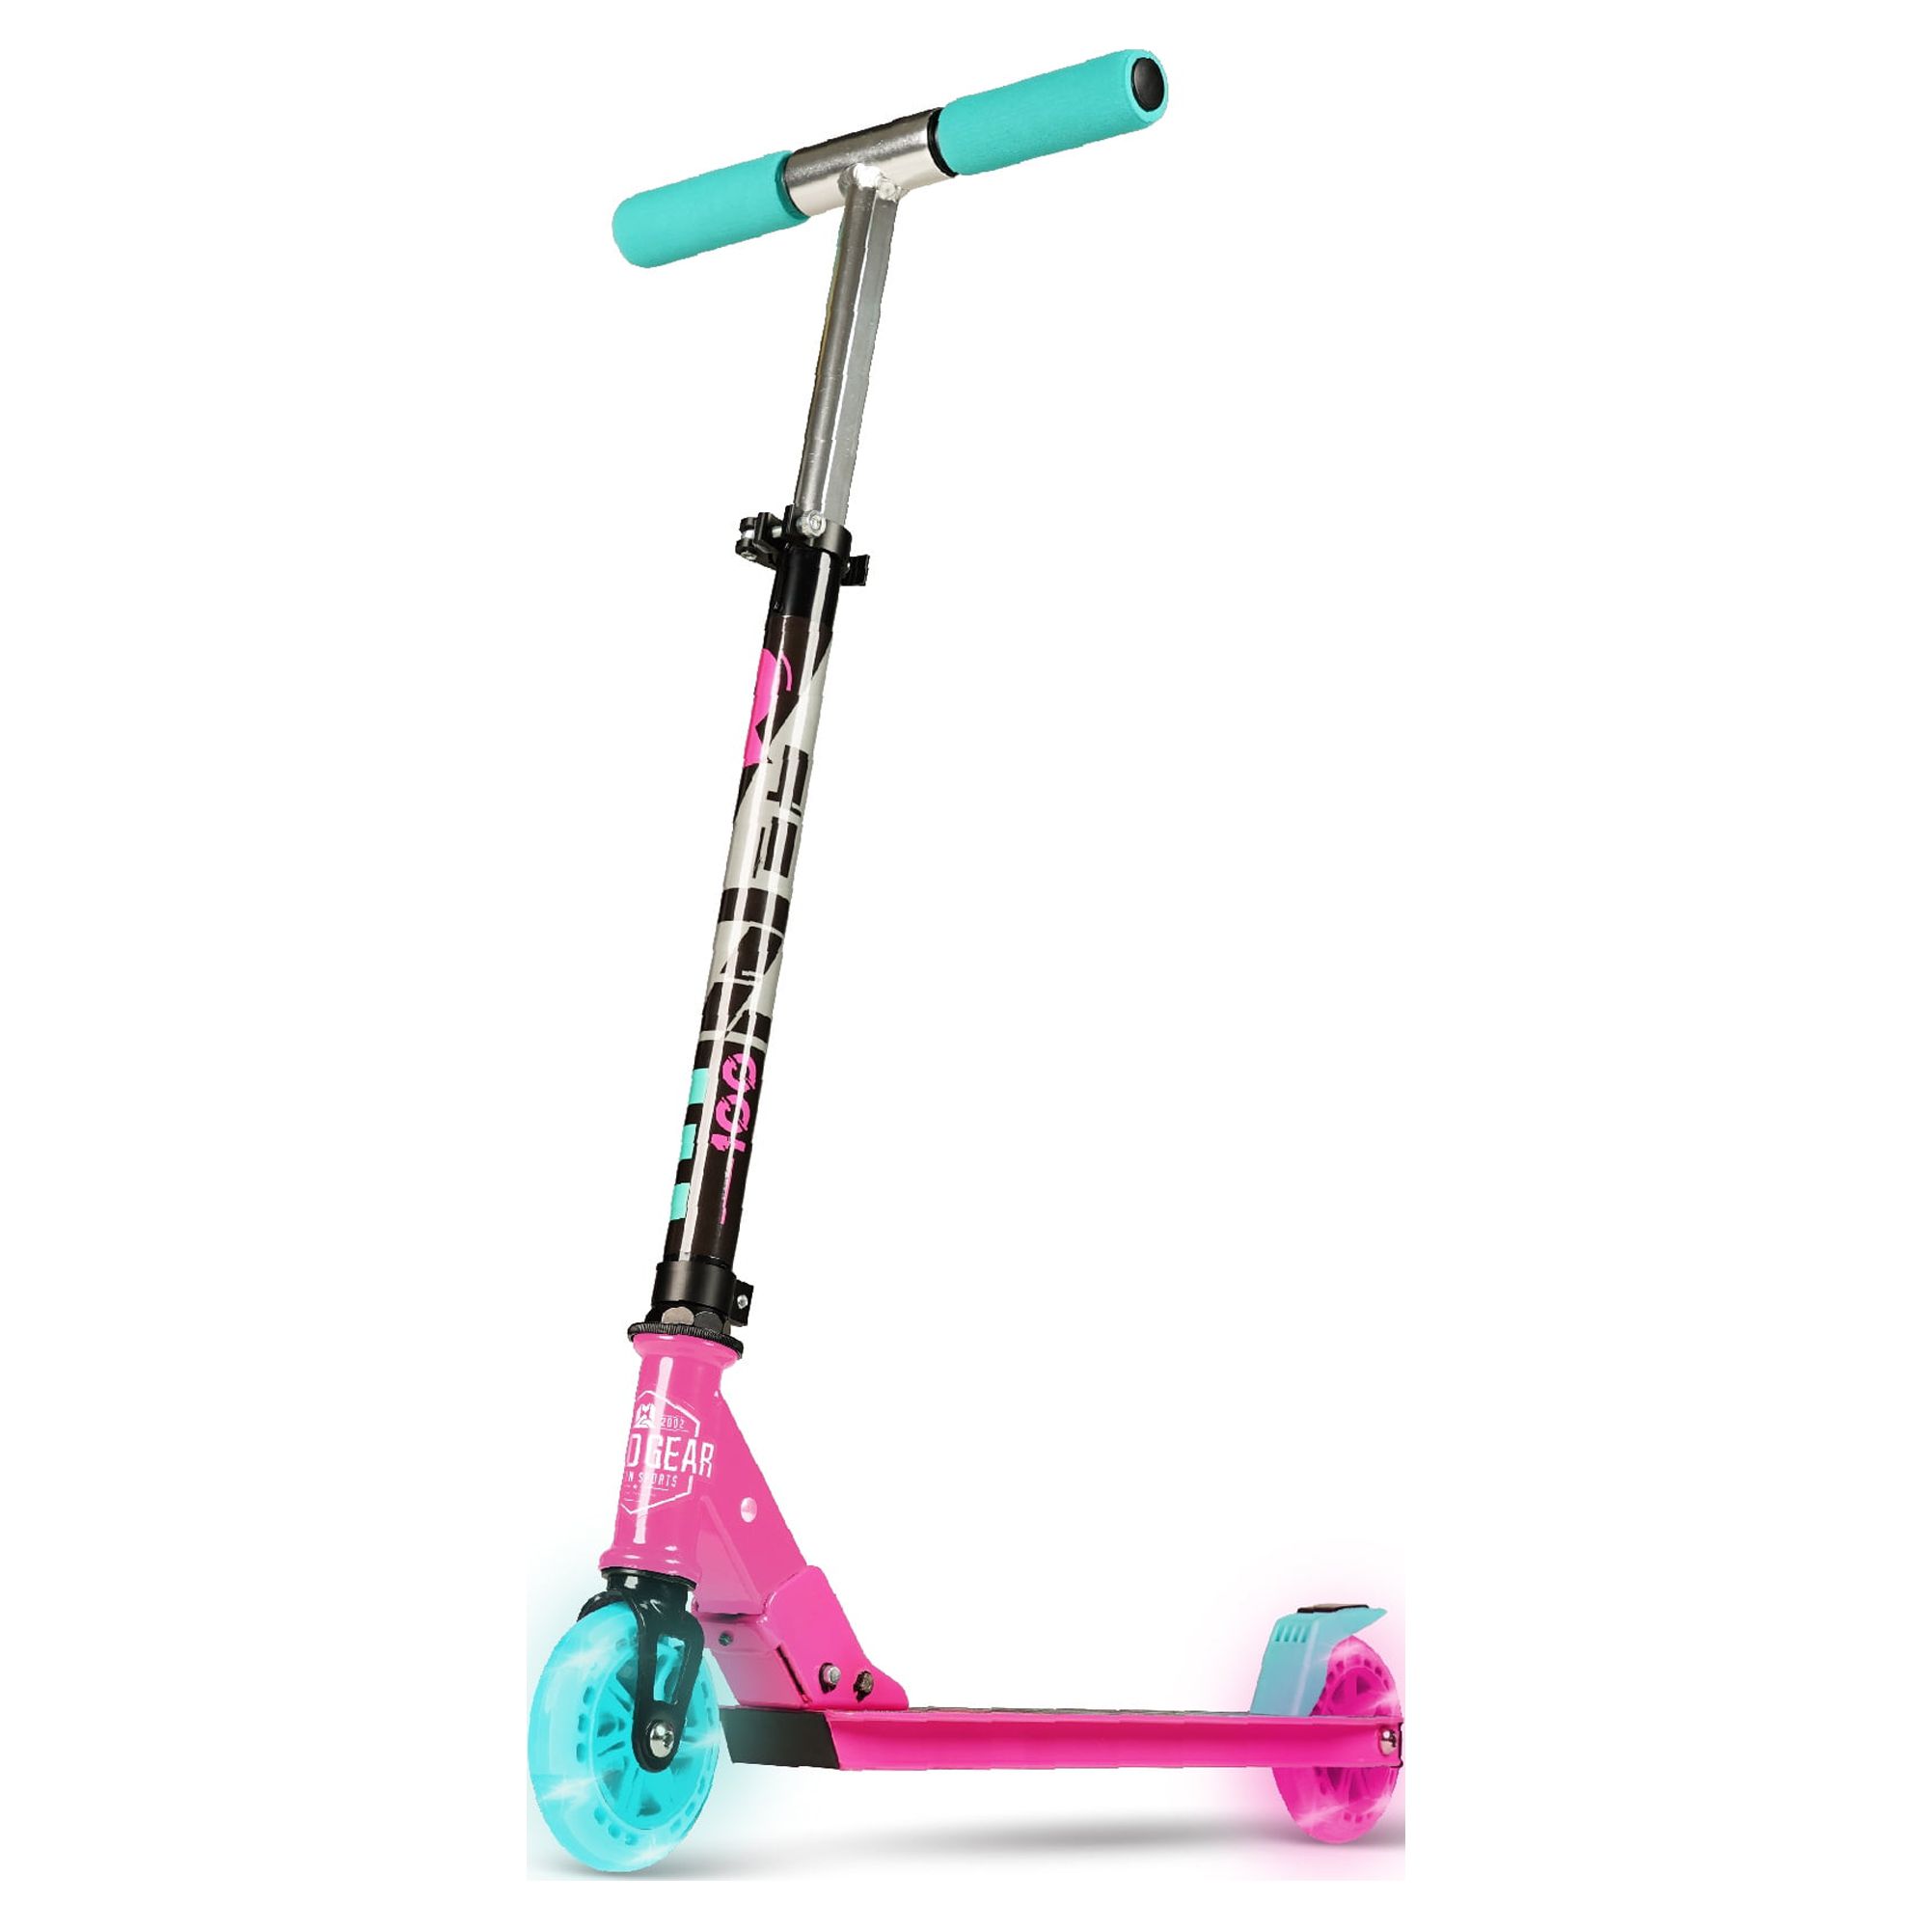 Madd Gear Rize 100 Light-Up Scooter - Pink Teal - image 1 of 16